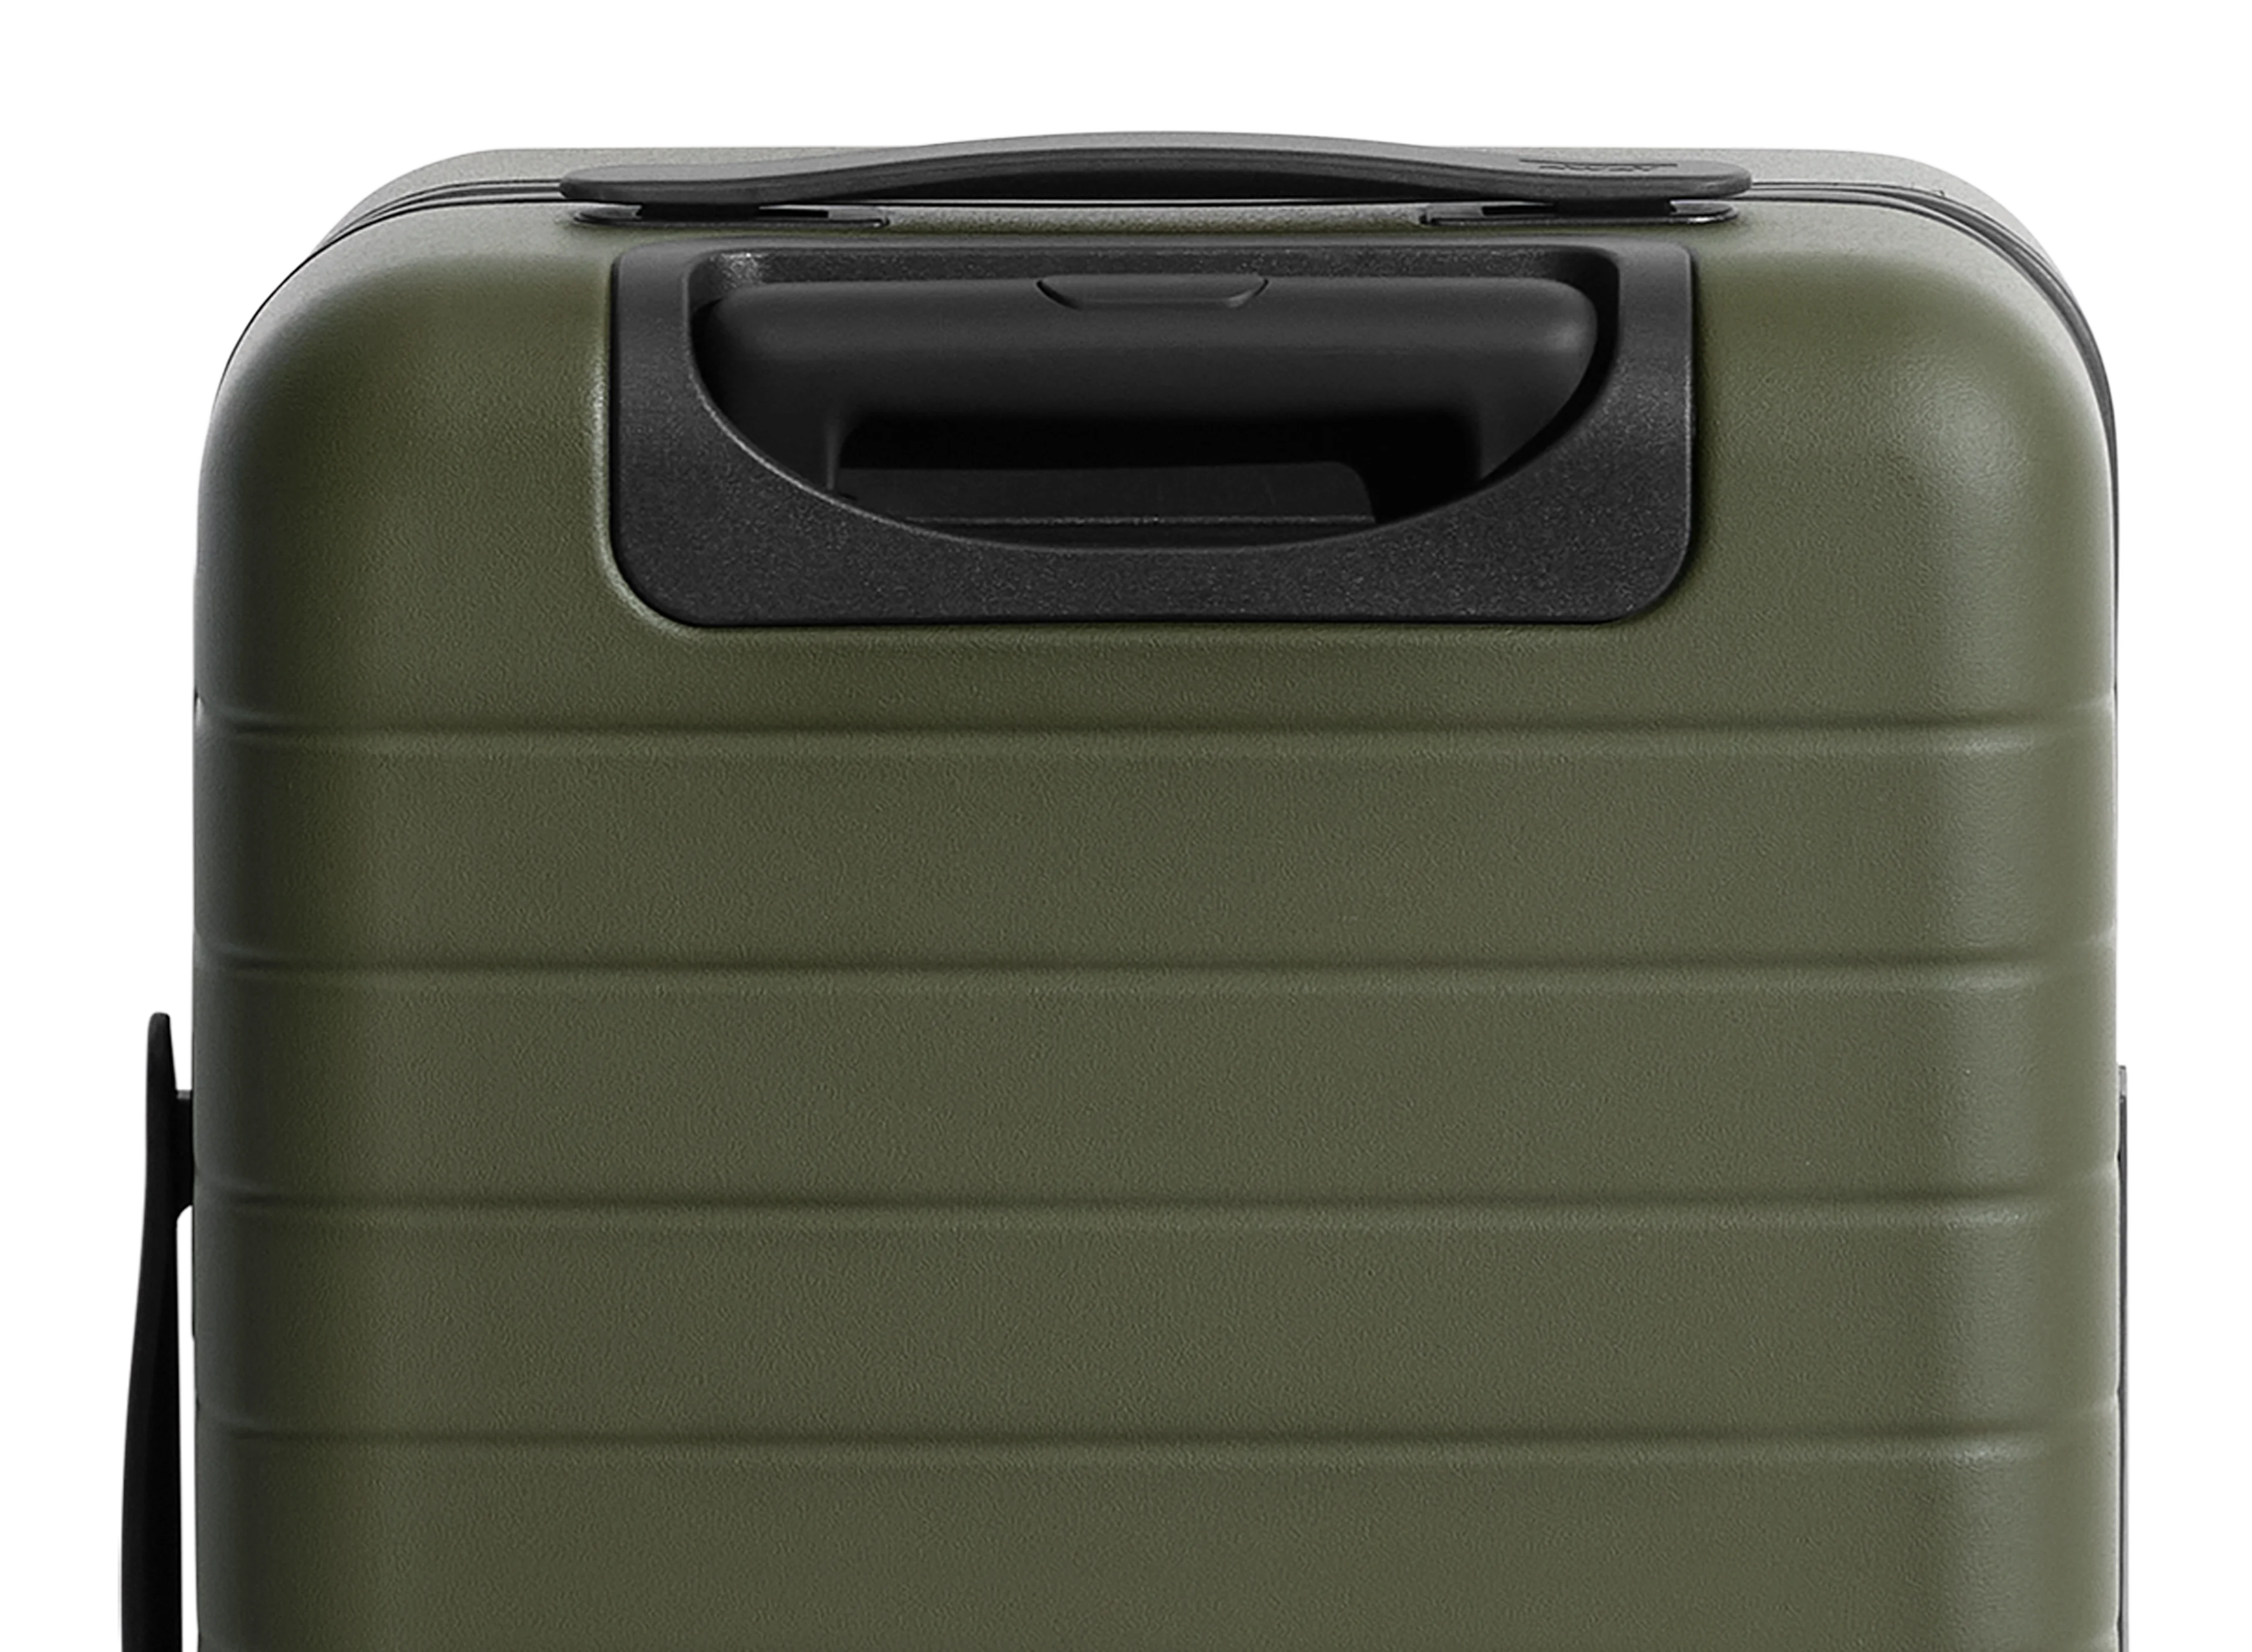 The Carry-On in Olive Green